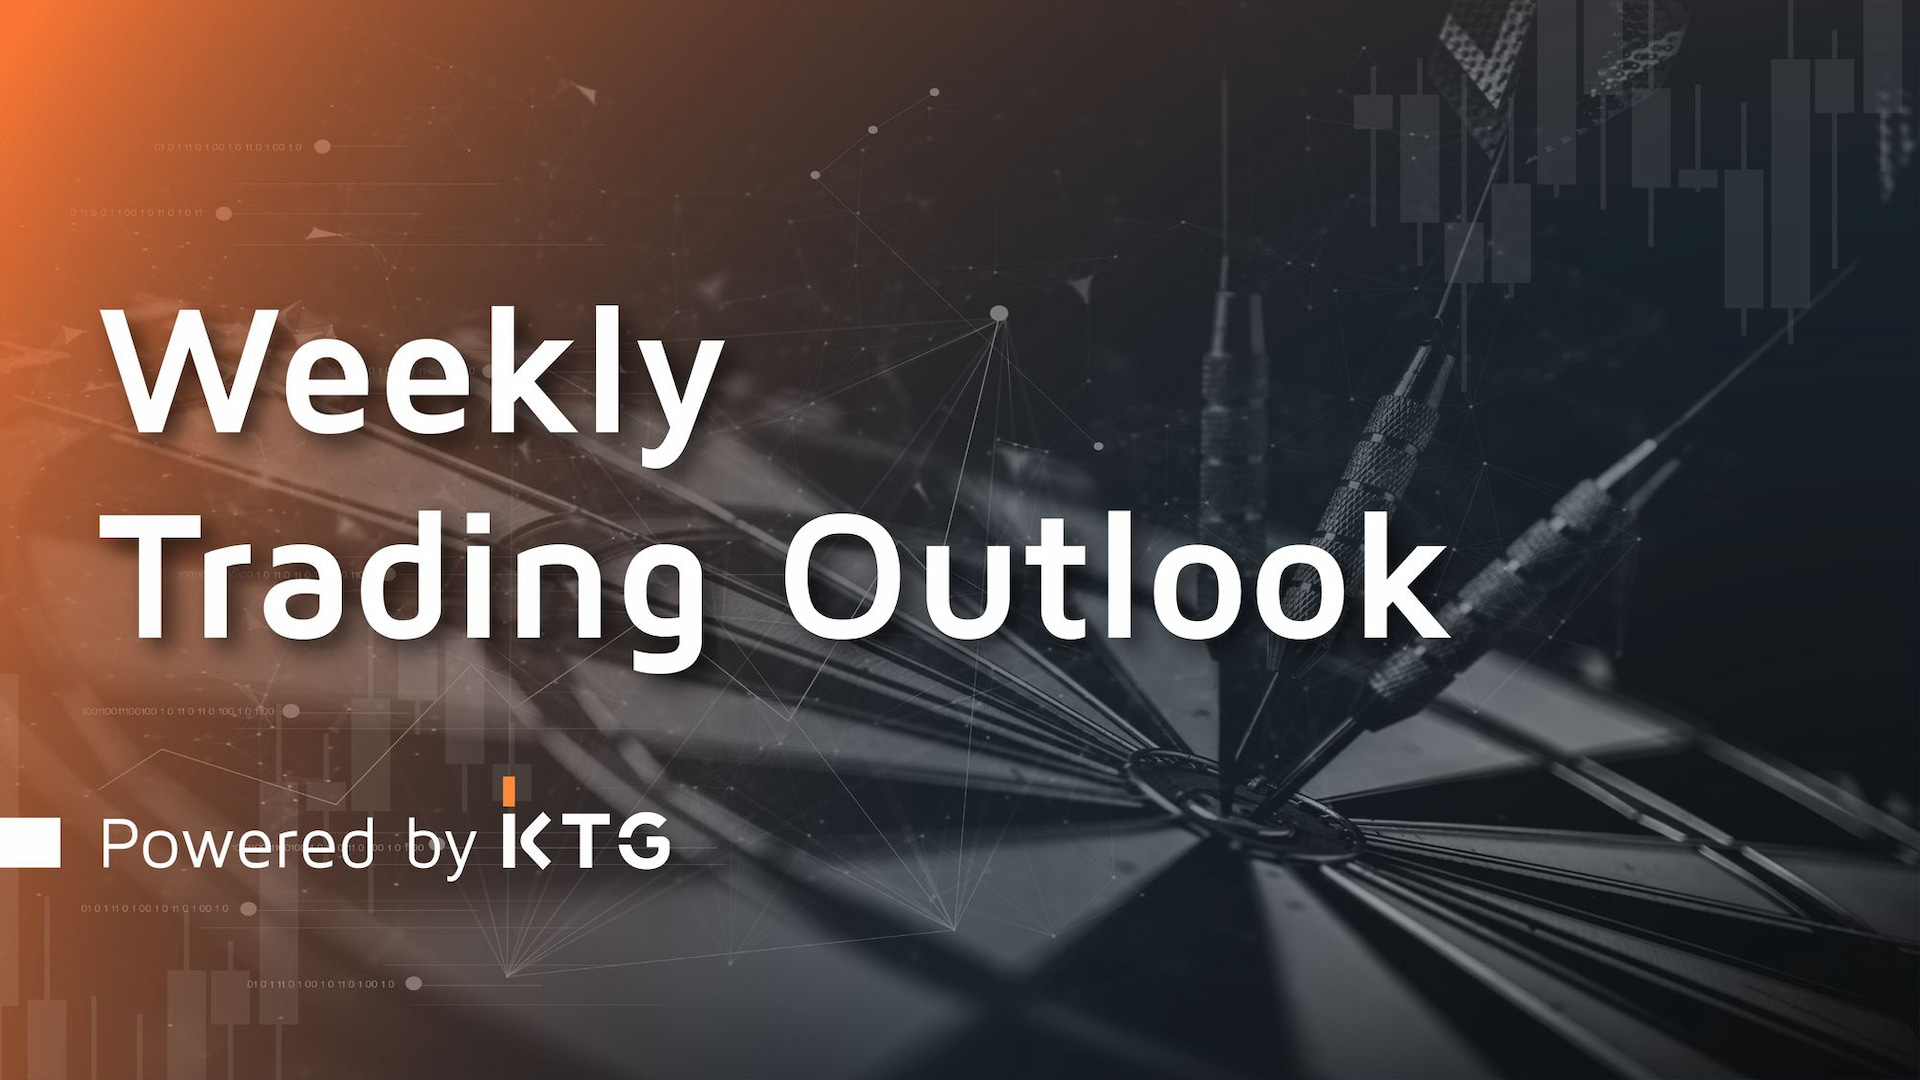 Strong uptrend in play #TradingOutlook - Powered by KTG